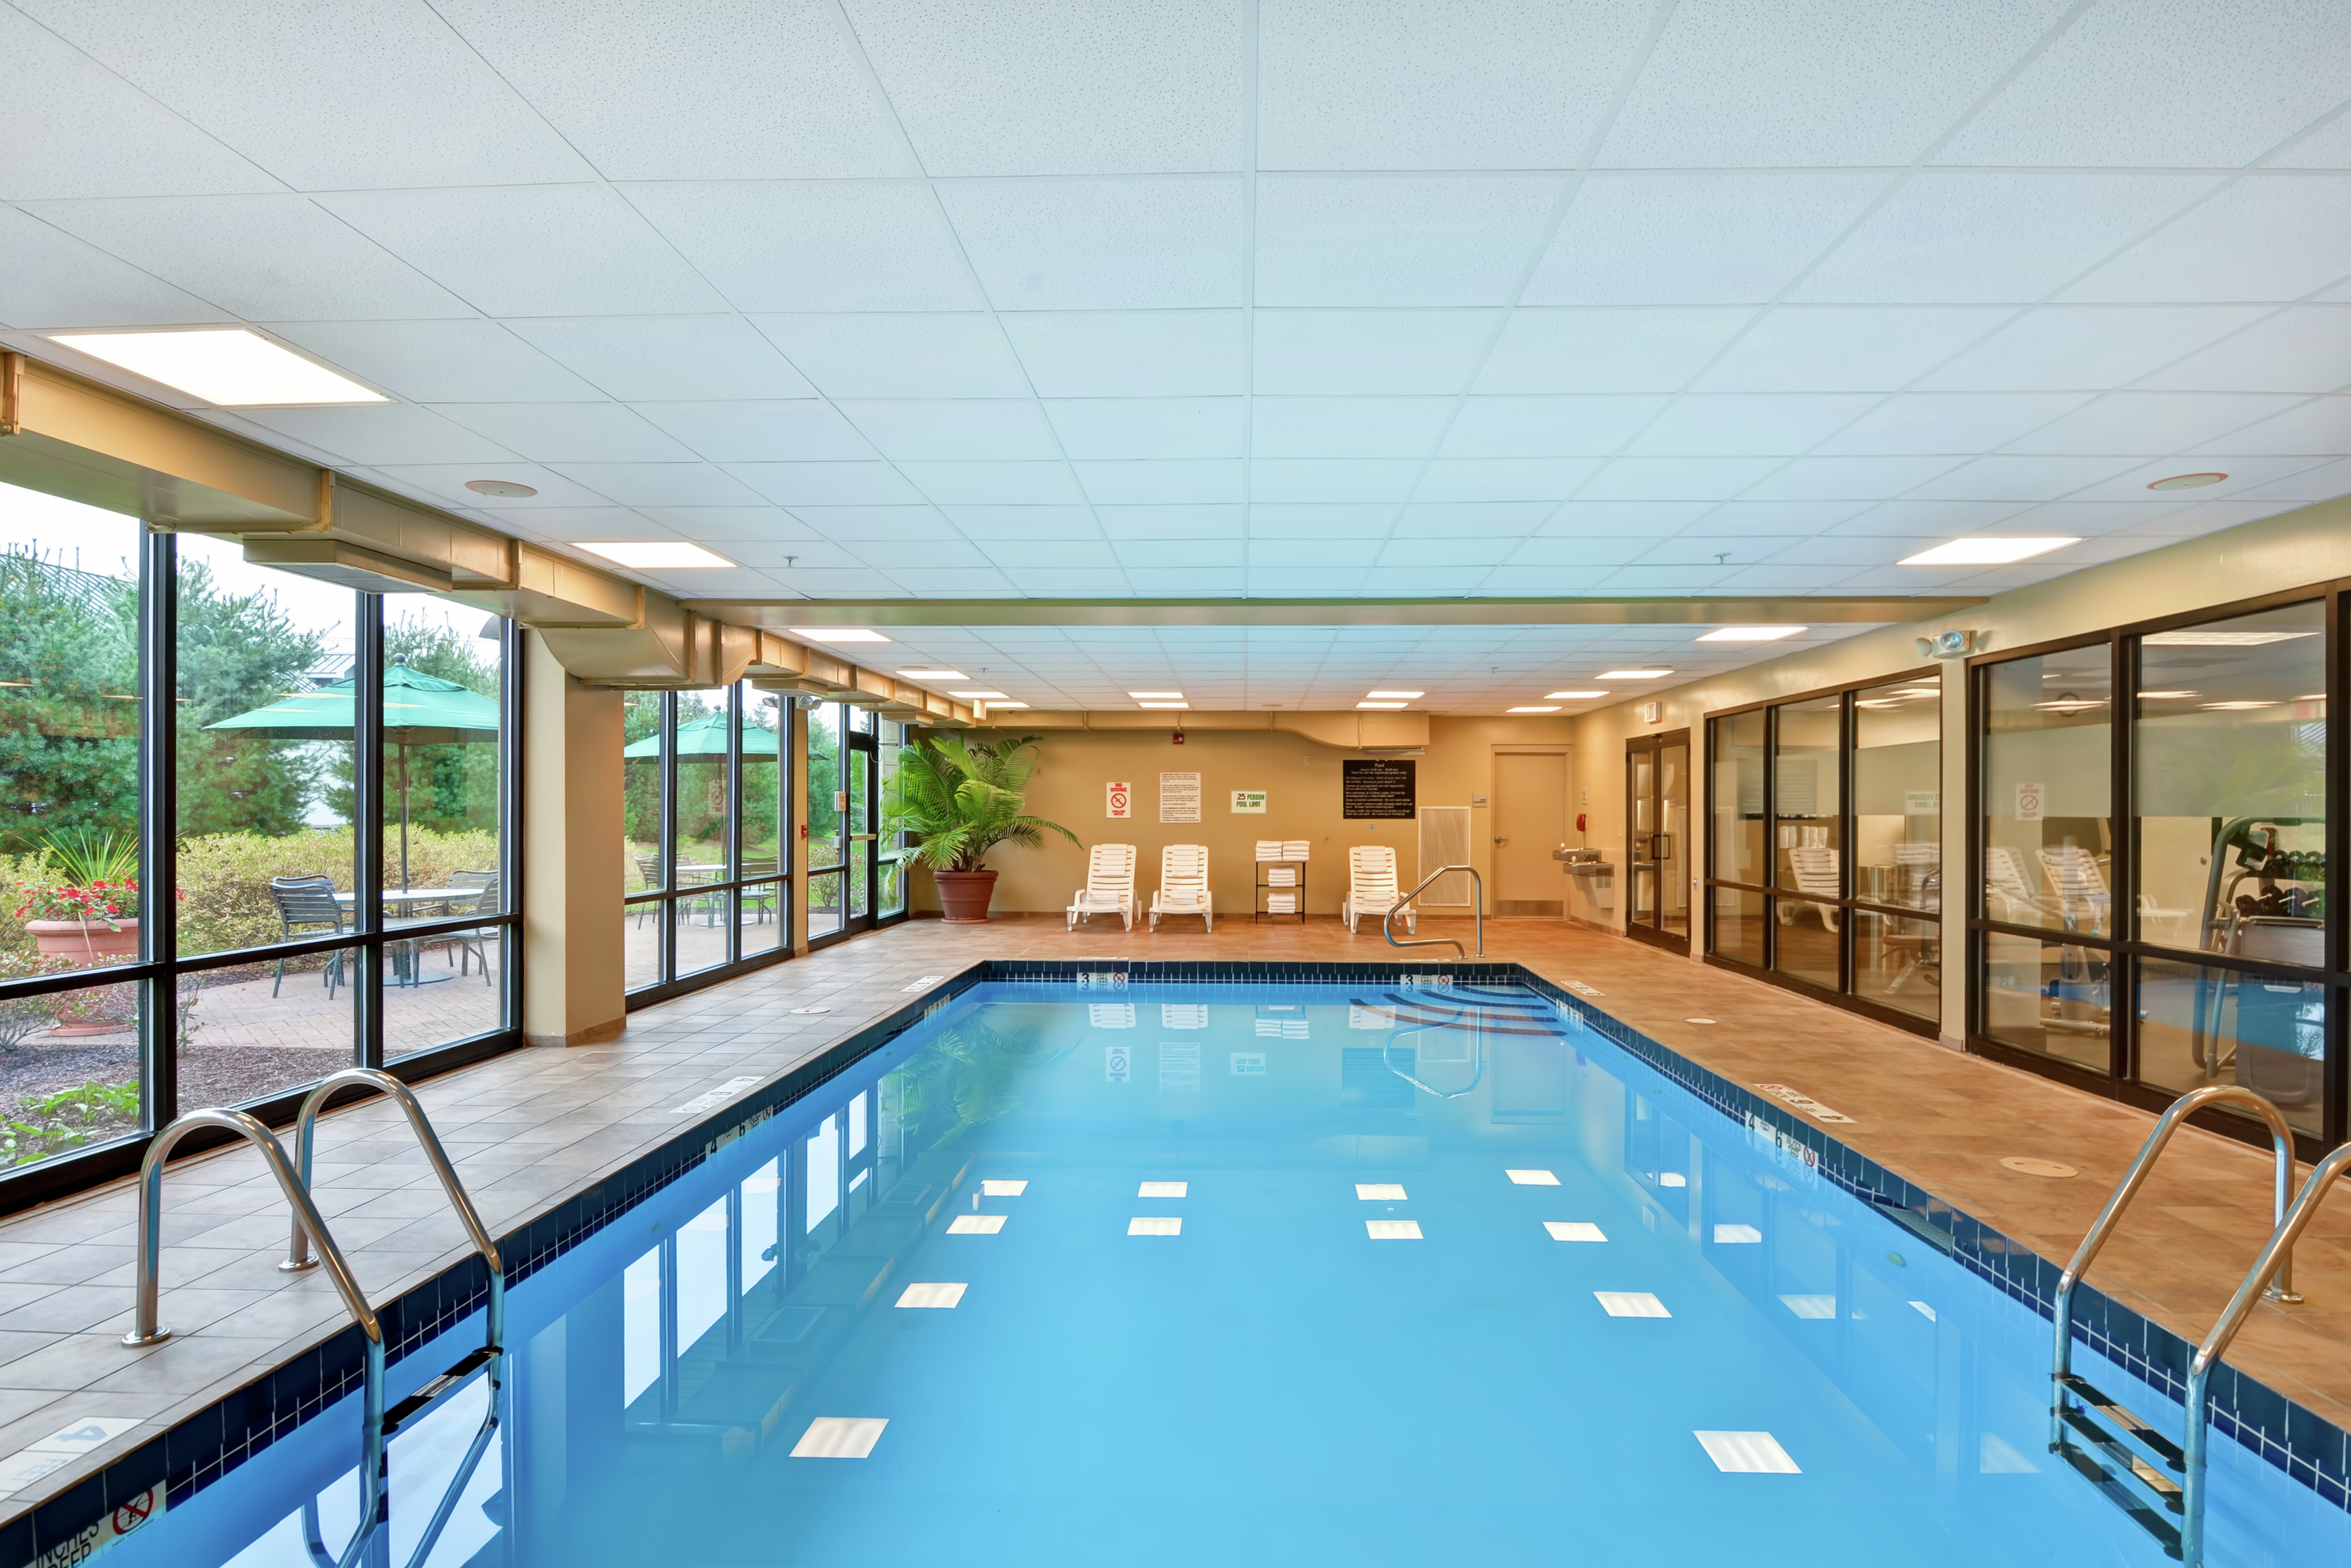 Indoor Swimming Pool Area with Large Windows